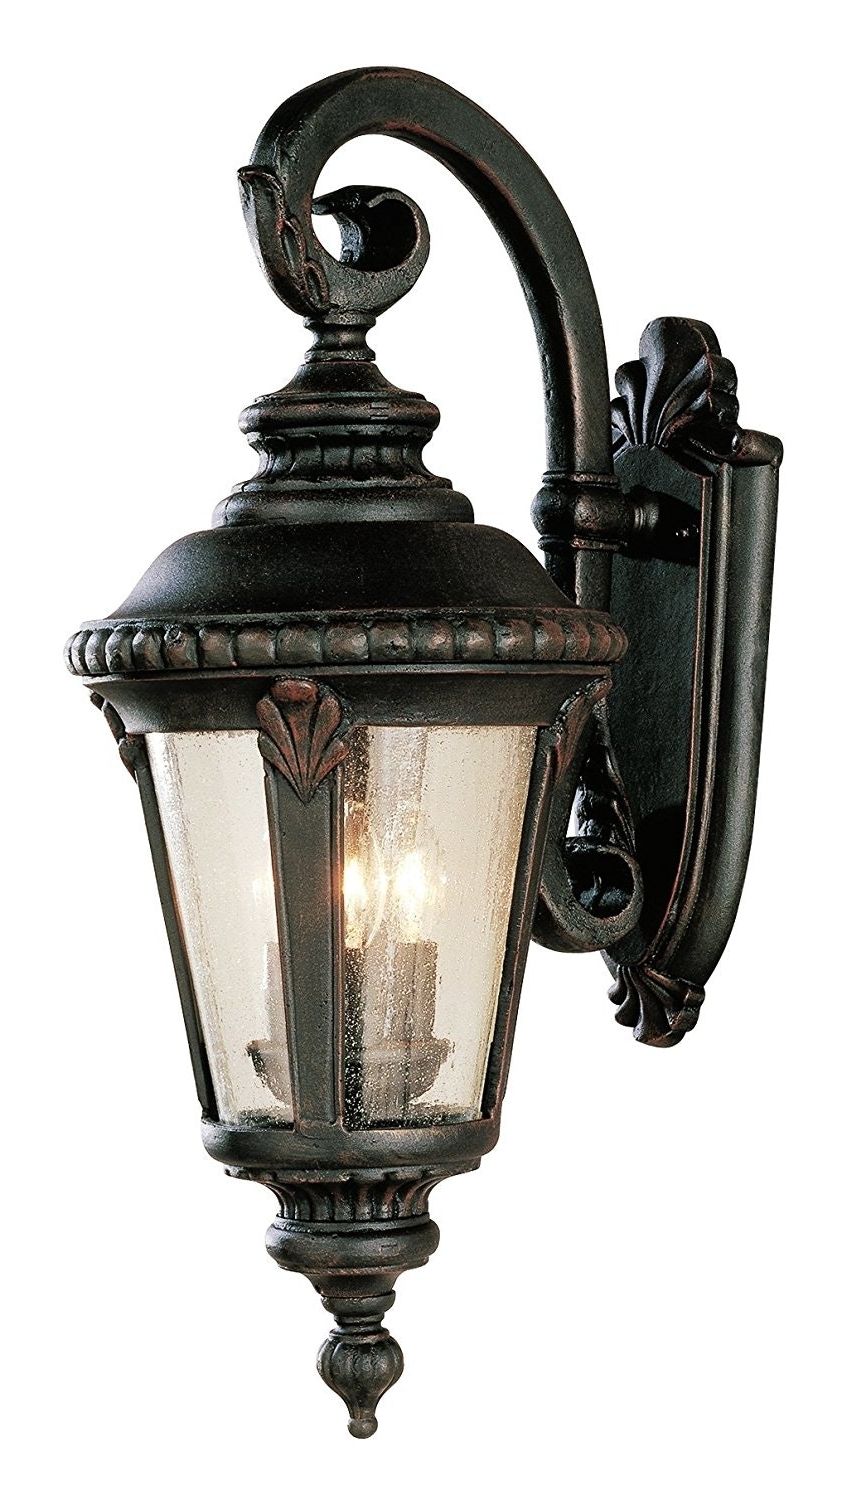 Famous Outdoor Wall Mounted Lighting The Home Depot Image With Astounding Inside Outdoor Wall Lighting At Amazon (View 16 of 20)